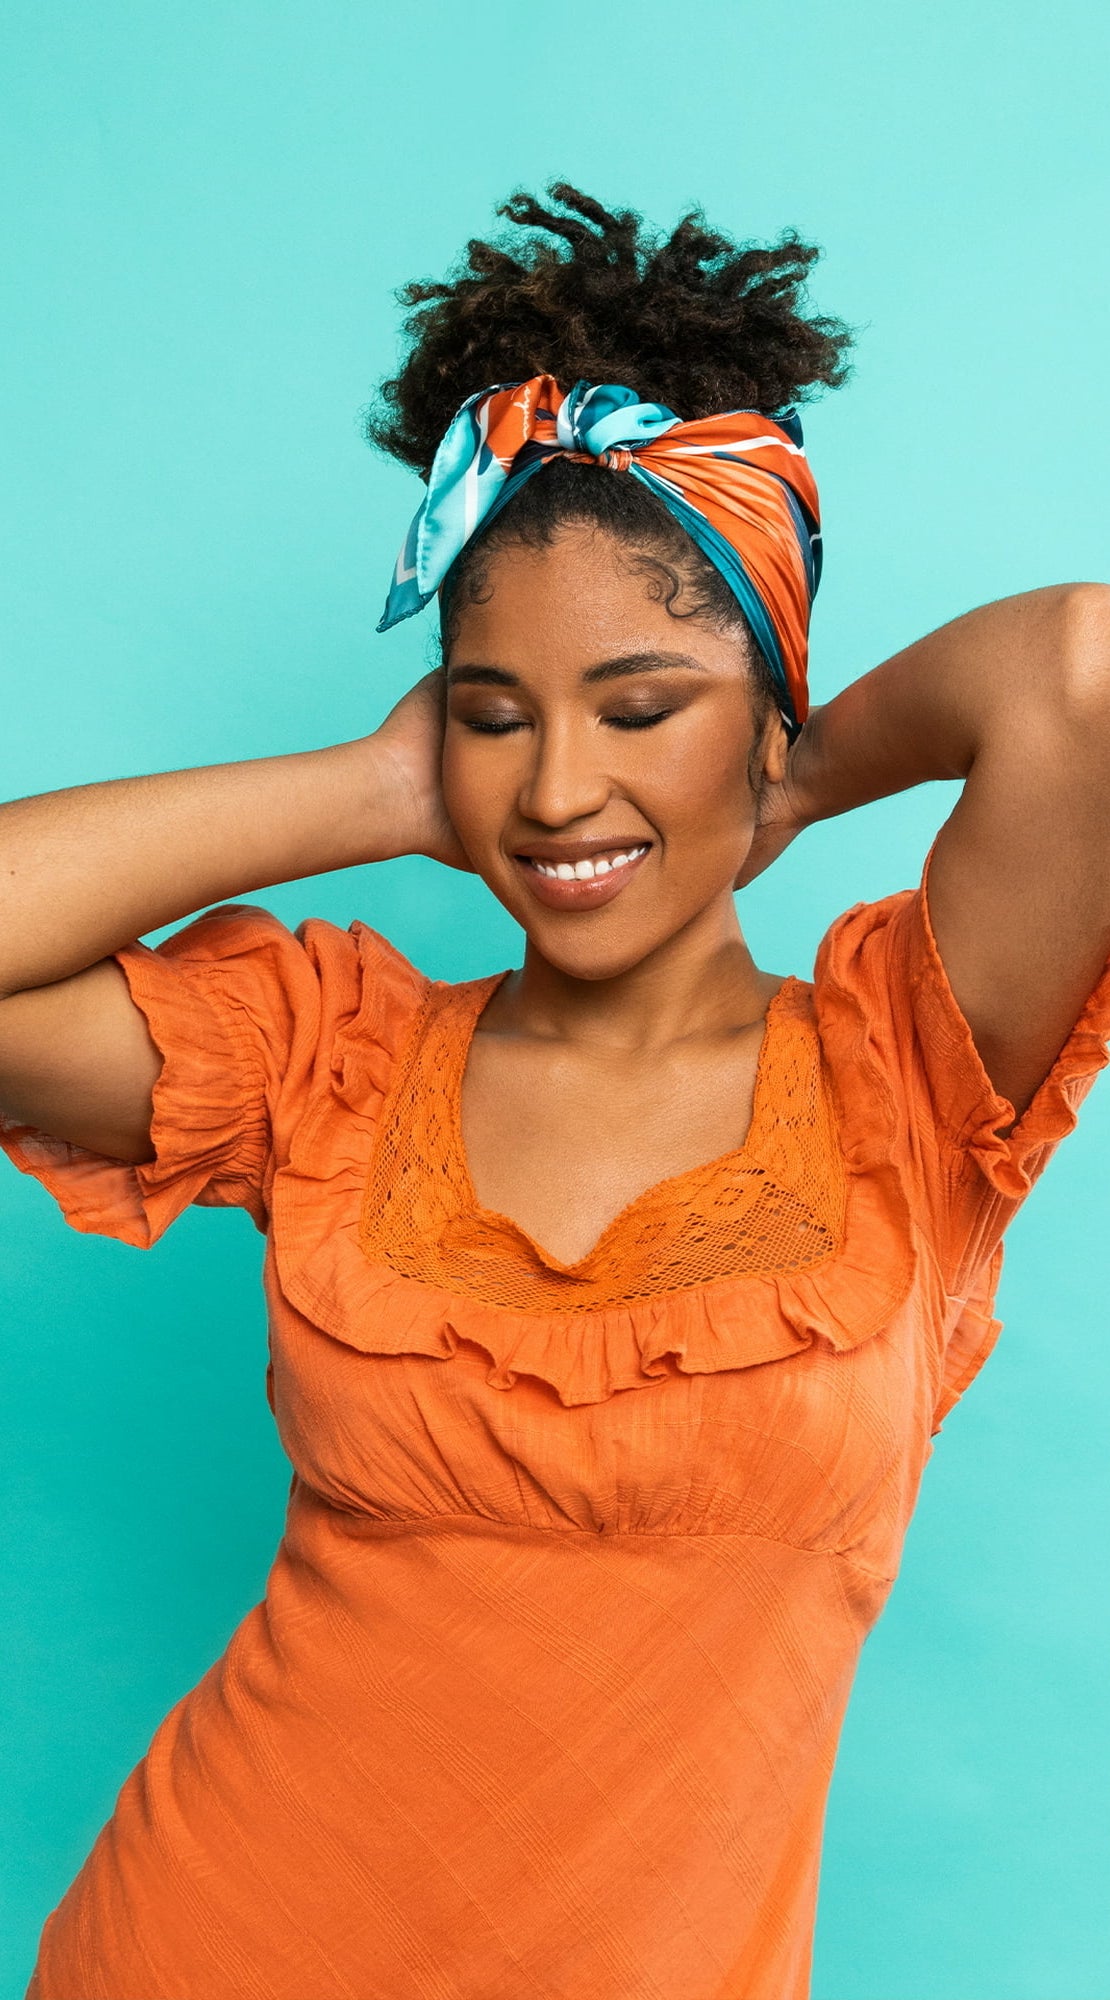 A model wearing the scarf wearing a bright orange dress with a teal backdrop